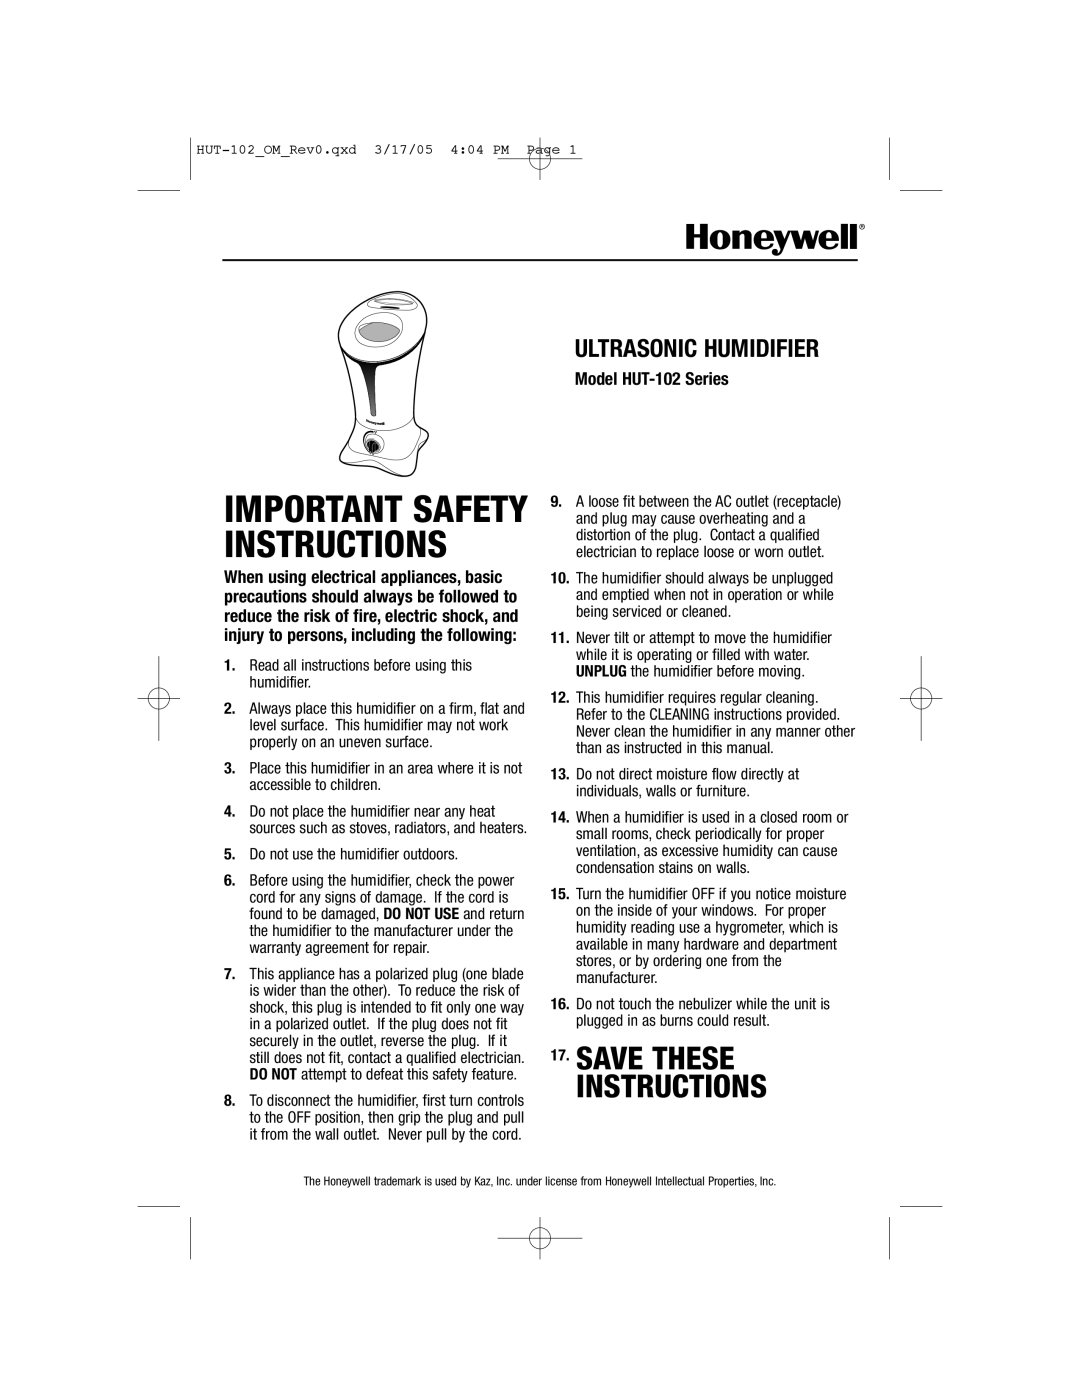 Honeywell important safety instructions Save These Instructions, Ultrasonic Humidifier, Model HUT-102Series 